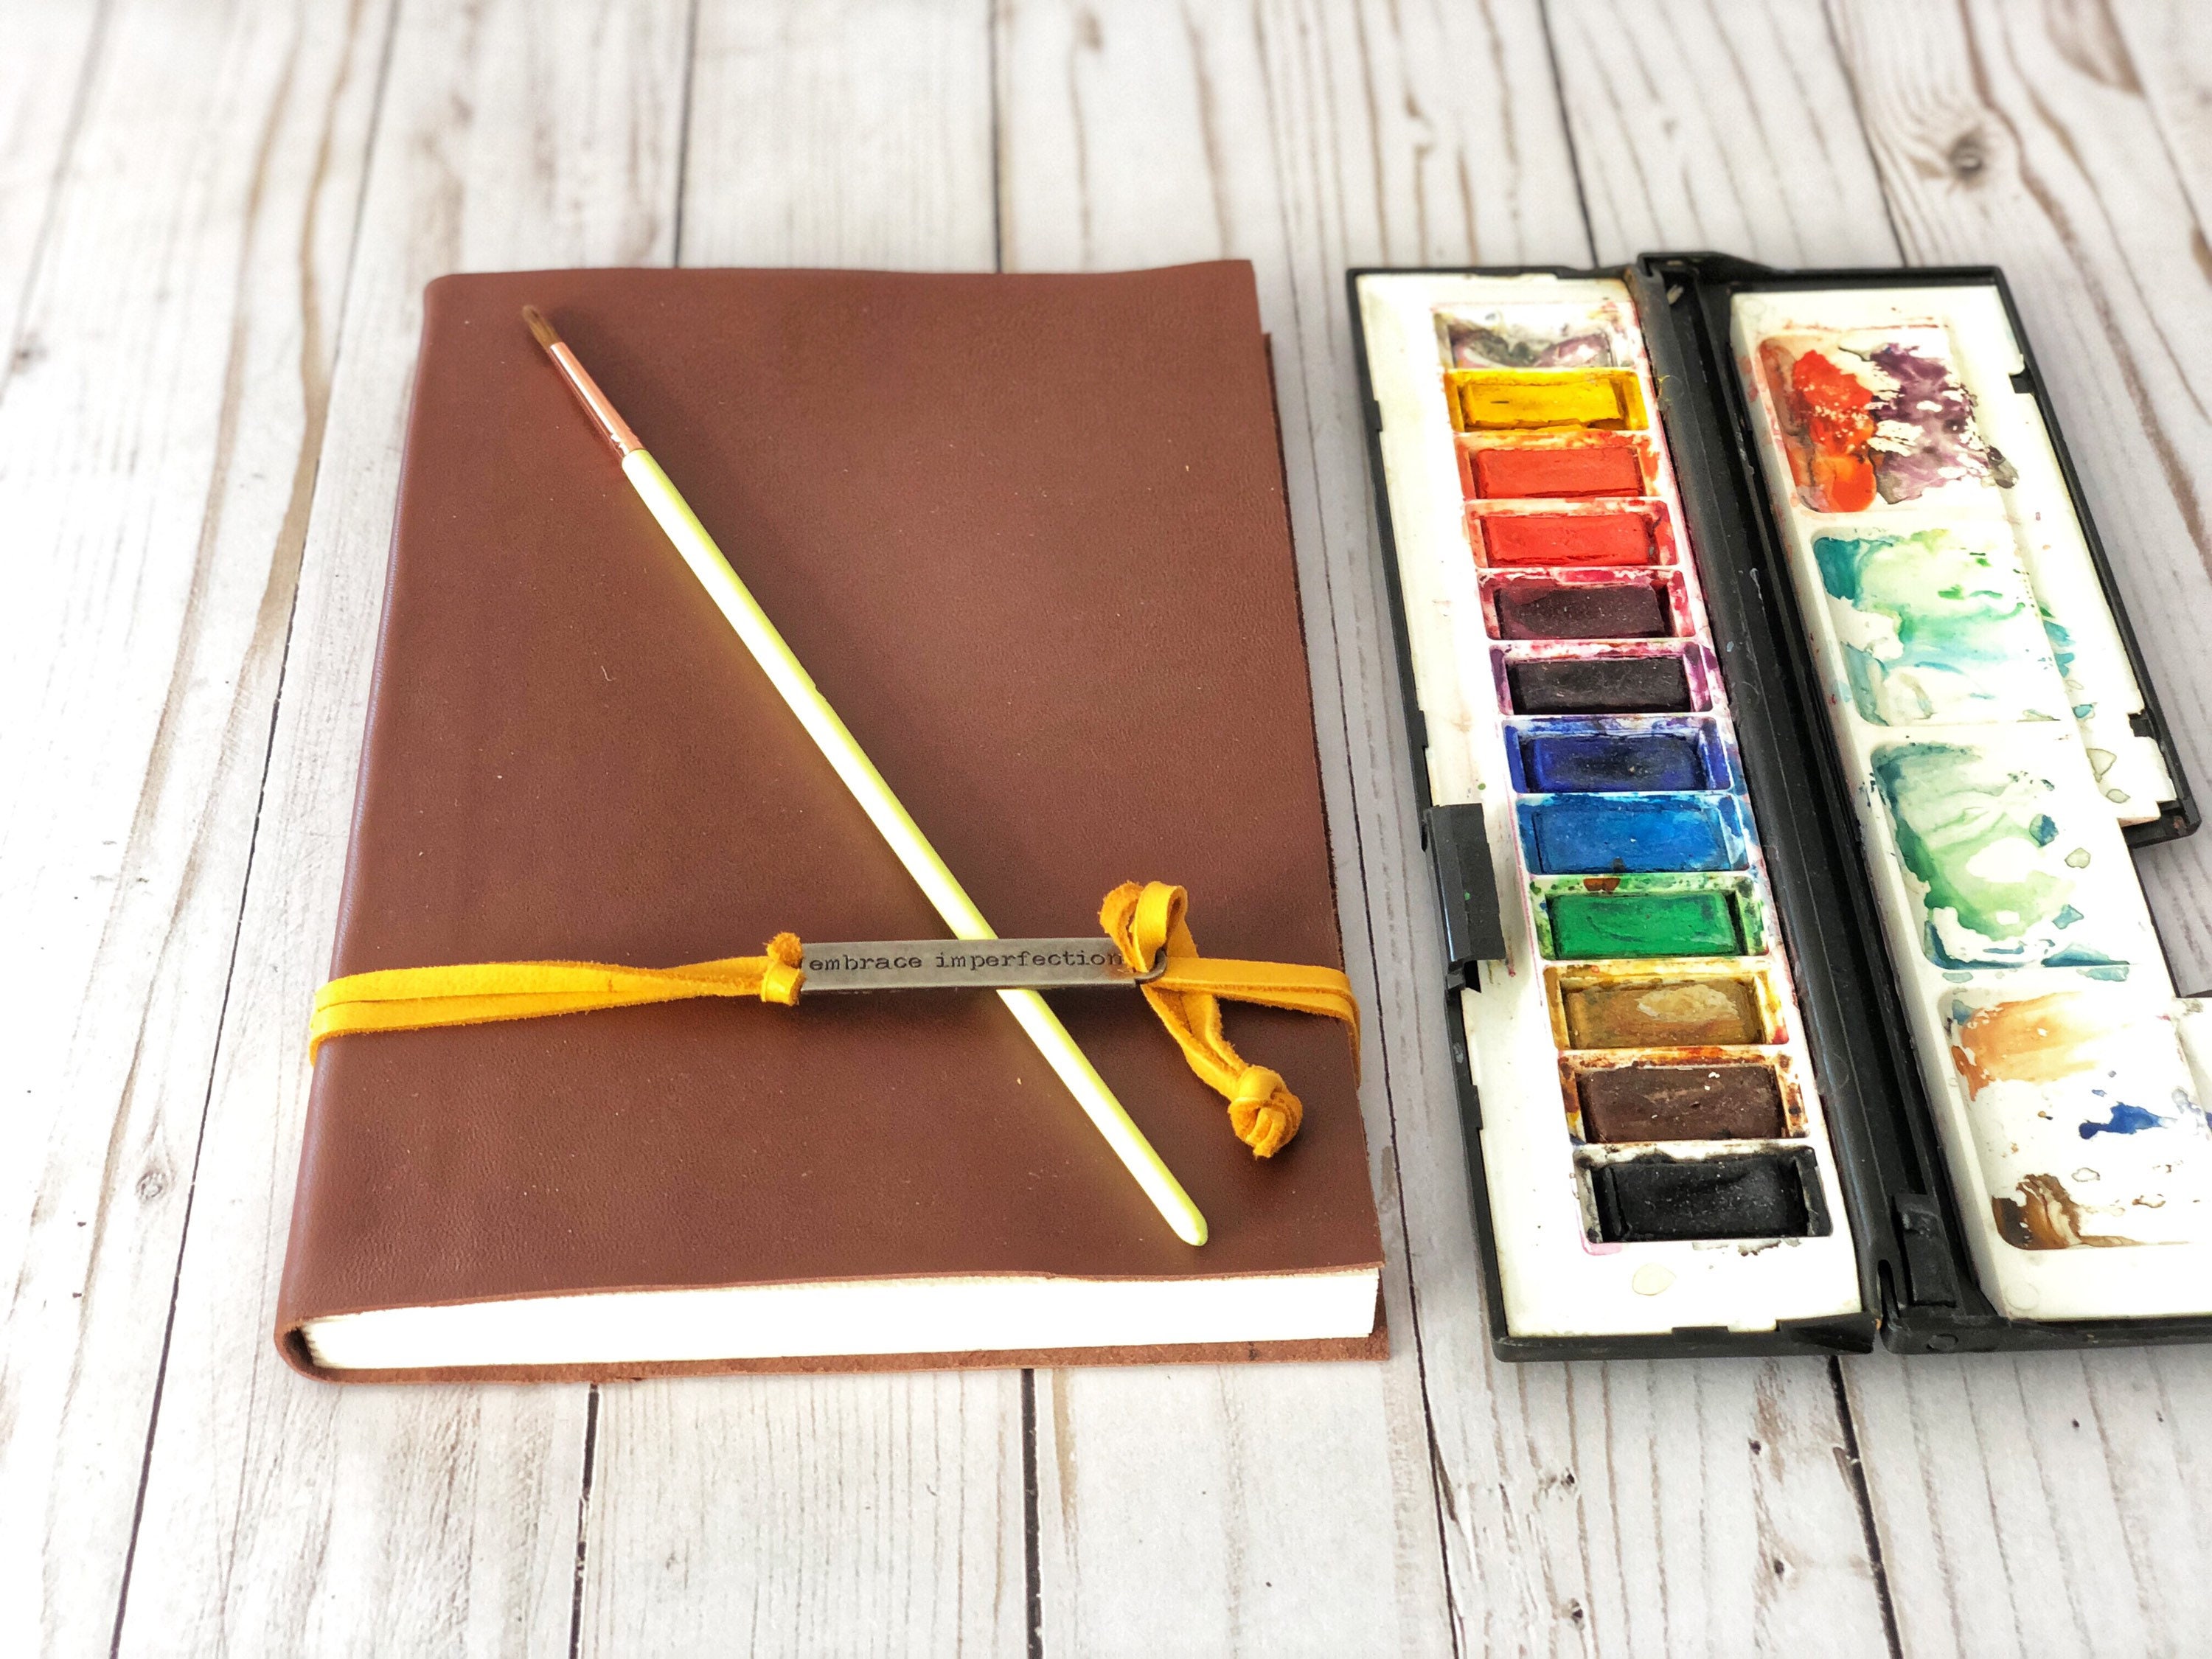 Pocket Cotton Watercolor Sketchbook, Small Travel Field Journal With 140lbs  Fabriano Artistico Hot Pressed Extra White & PL Leather Cover 